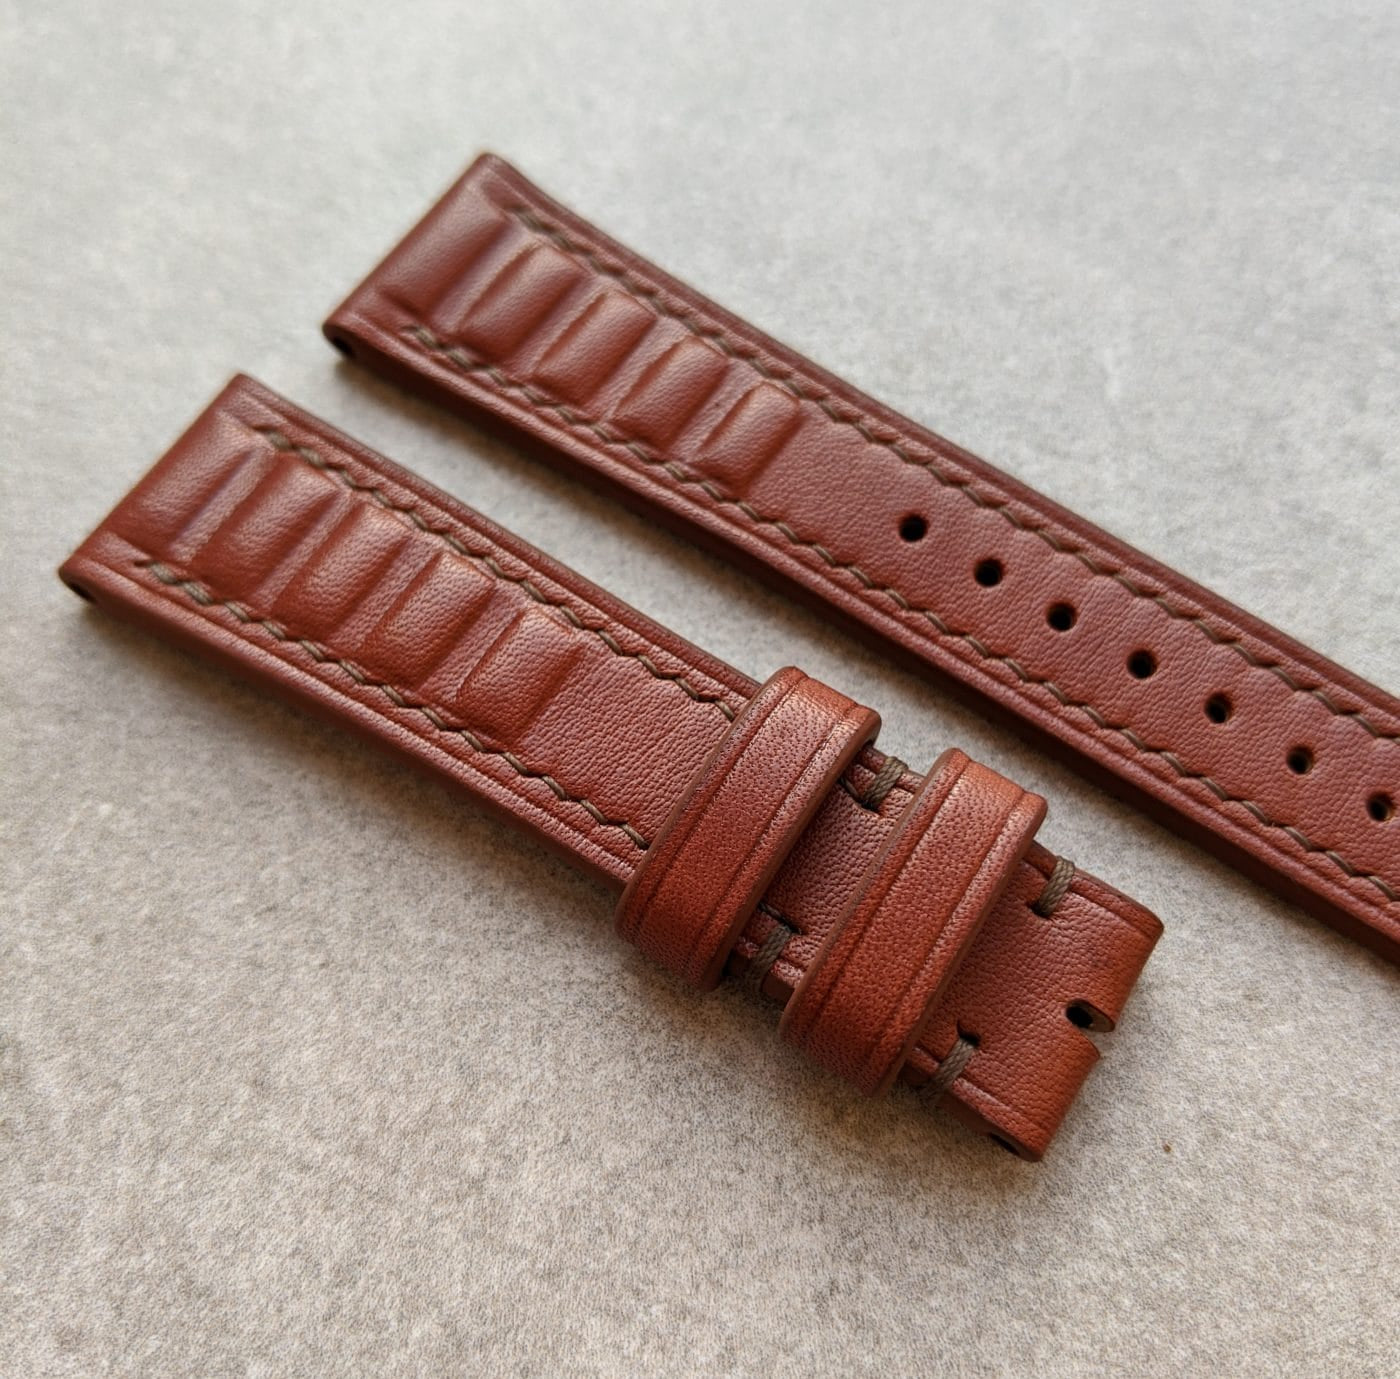 French Calfskin Strap Vintage Sport - Mahogany - The Strap Tailor